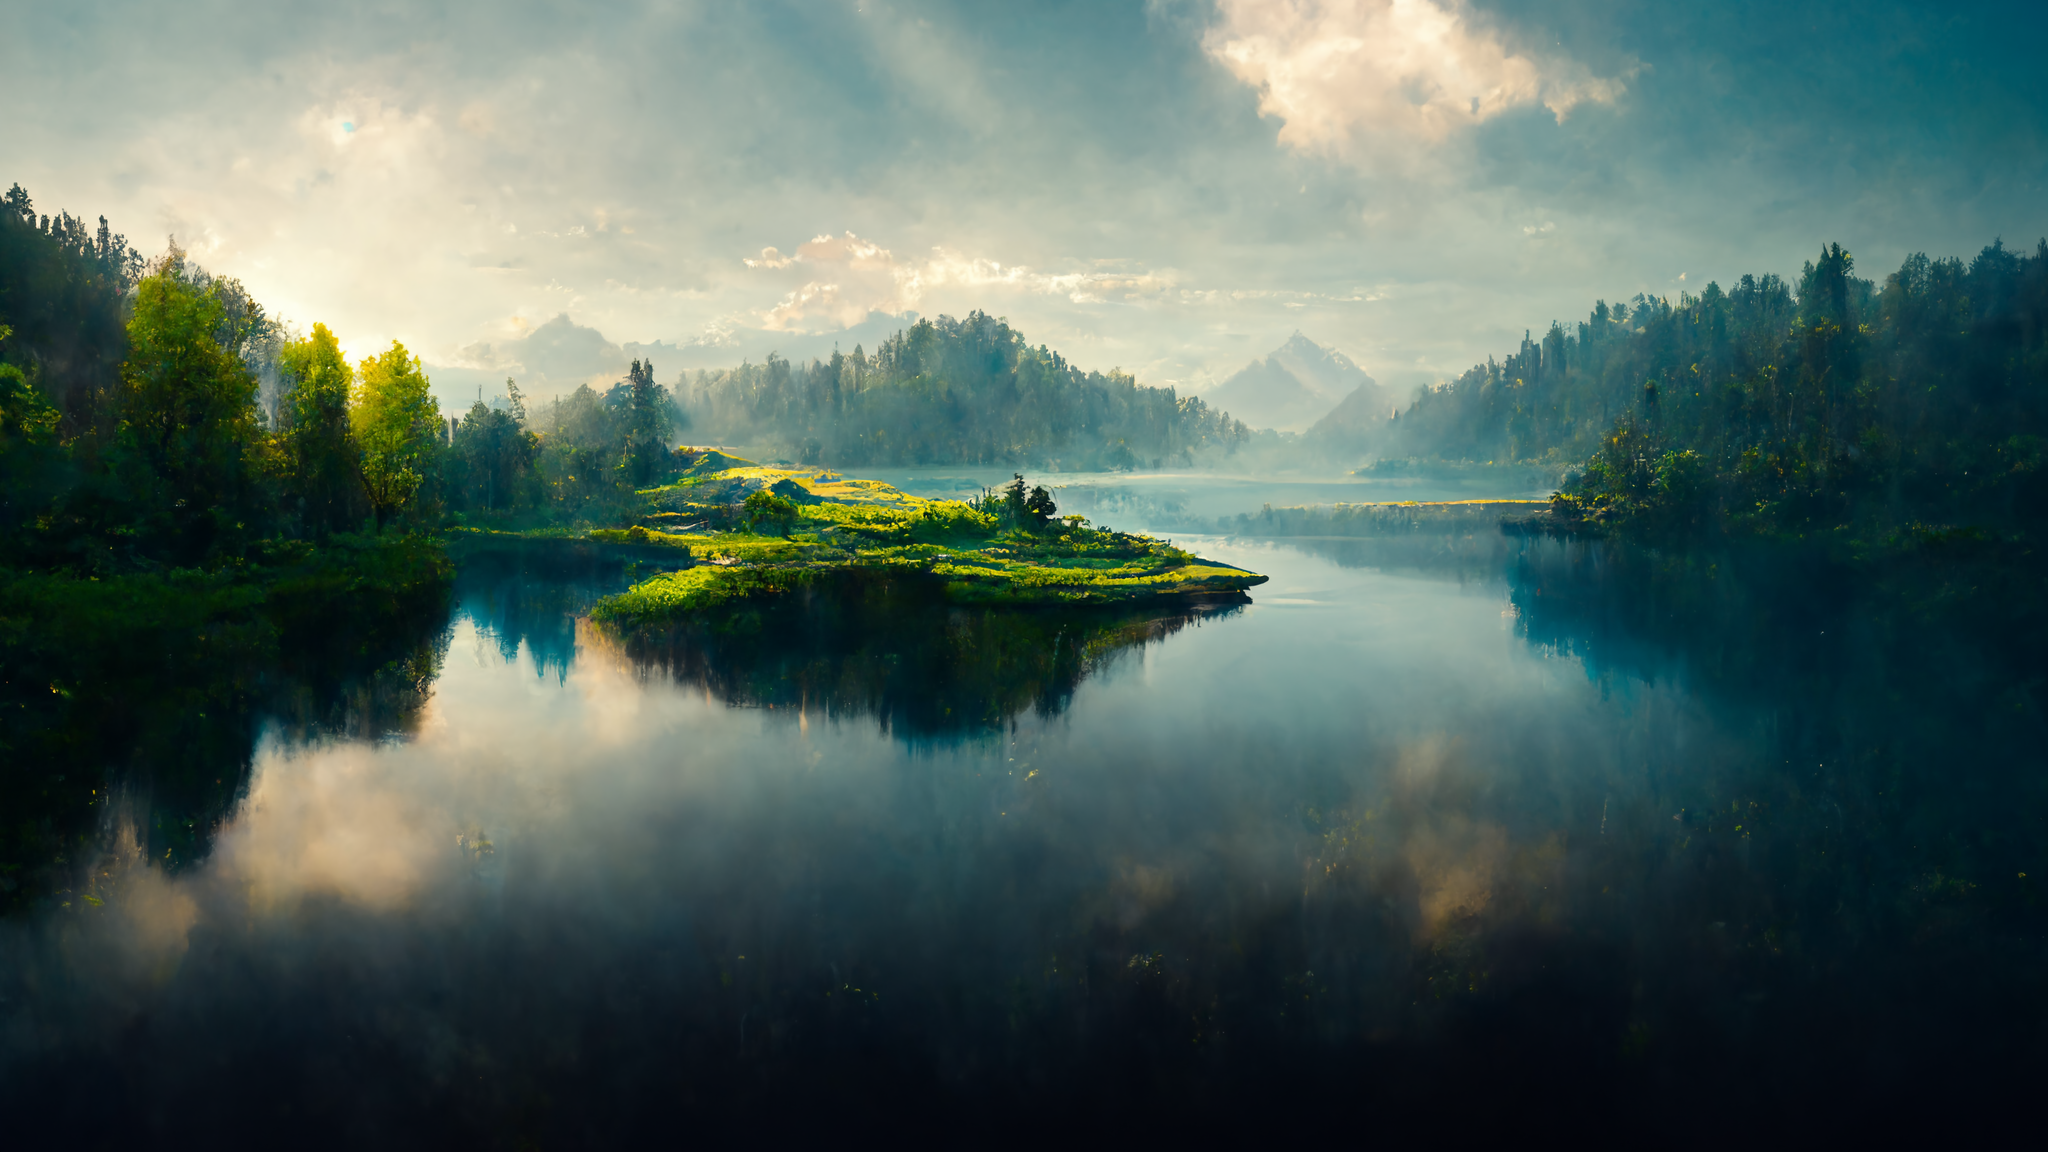 General 2048x1152 lake mountains forest water green grass clouds mist landscape CGI Sun reflection nature AI art